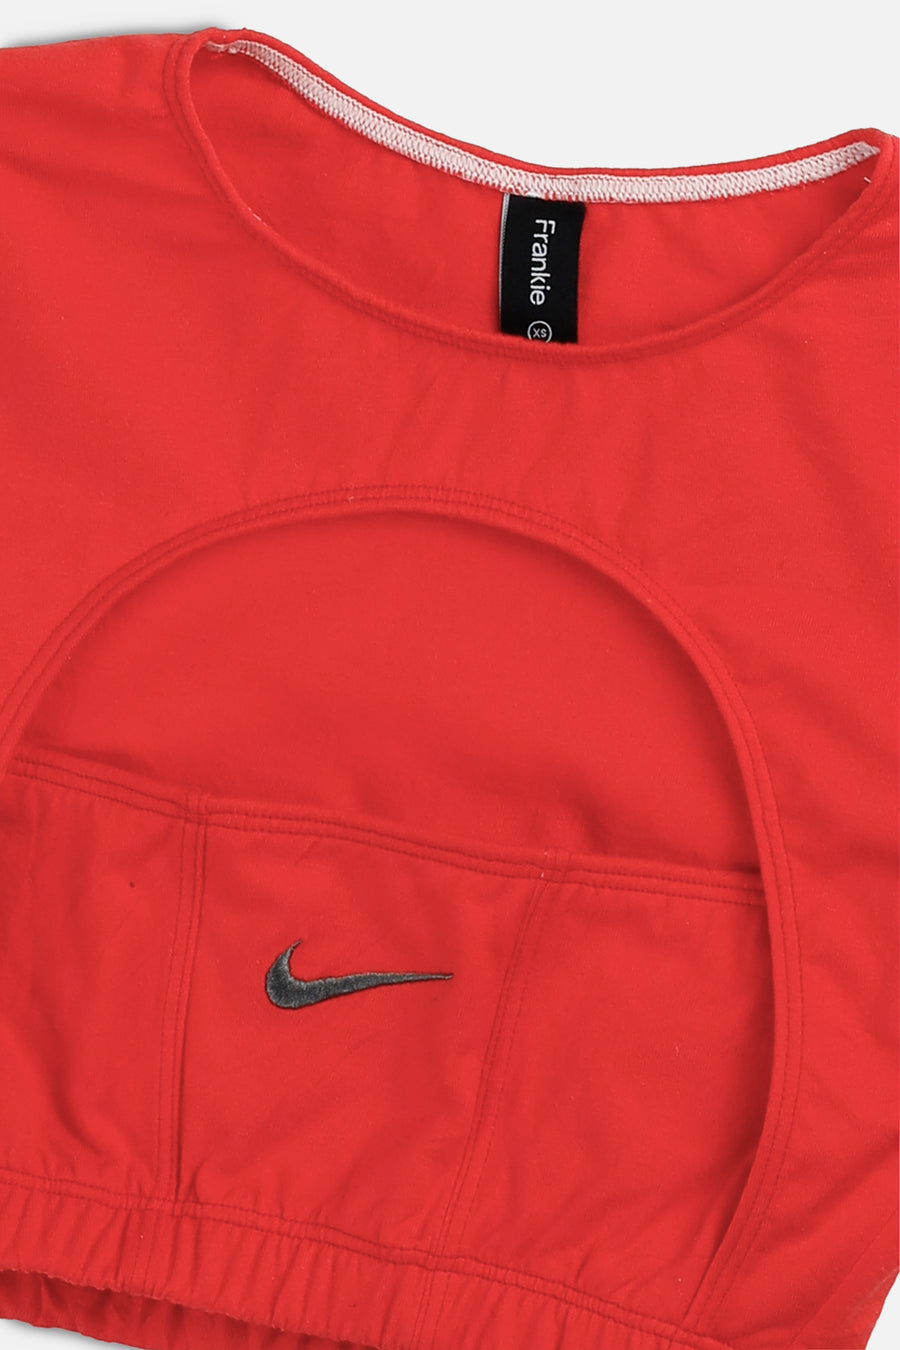 Rework Nike Cut Out Tee - XS